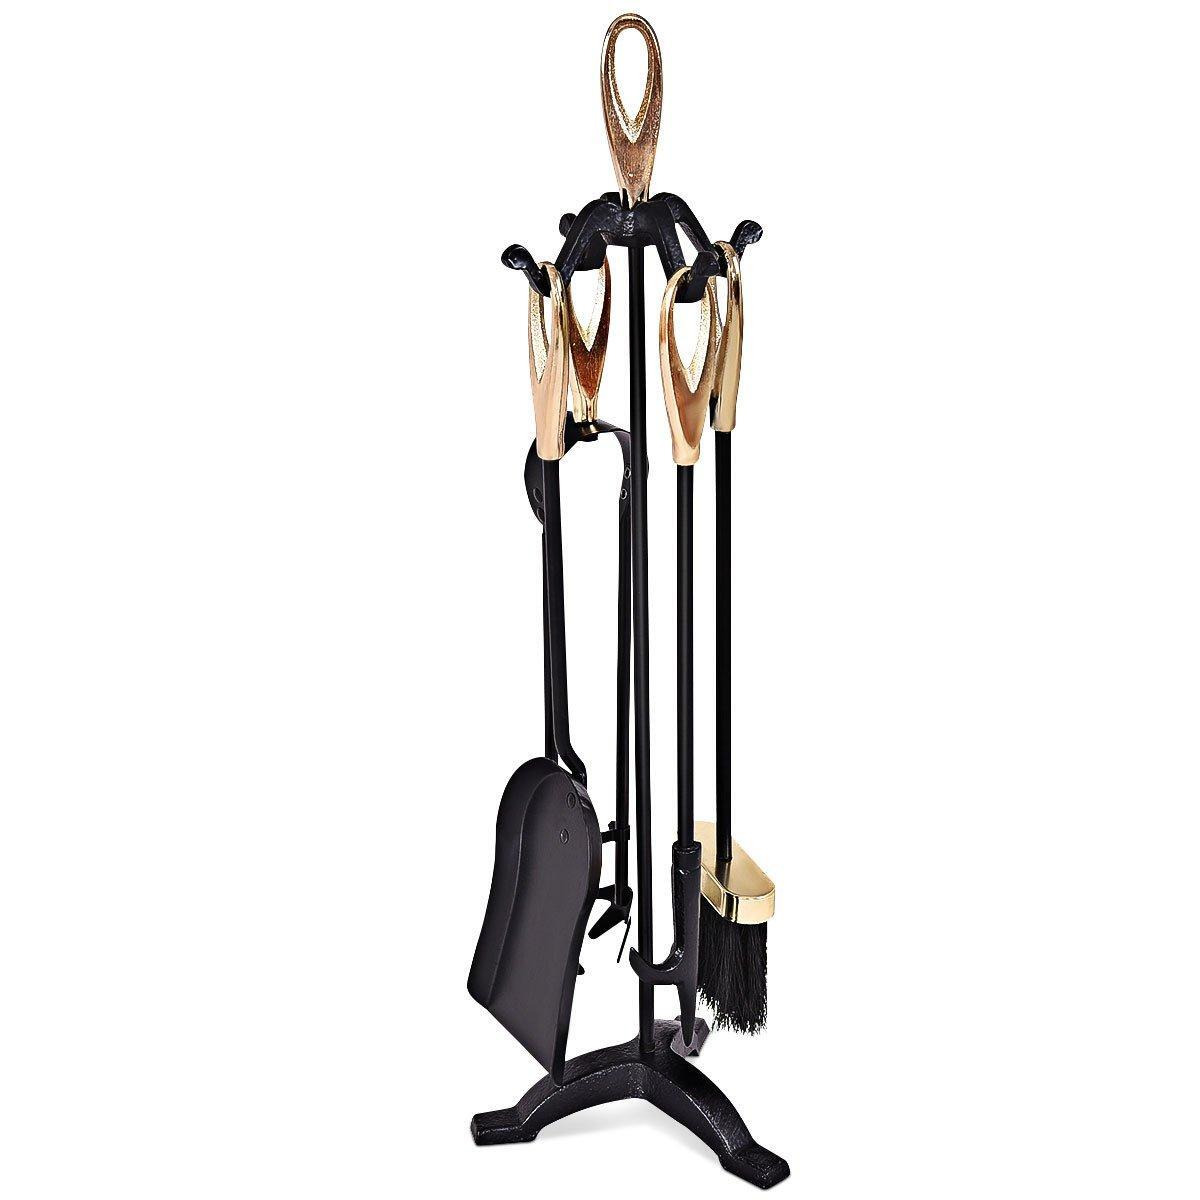 5 Piece Fireplace Companion Set Wrought Iron Fire Tools with Tong Shovel - image 1